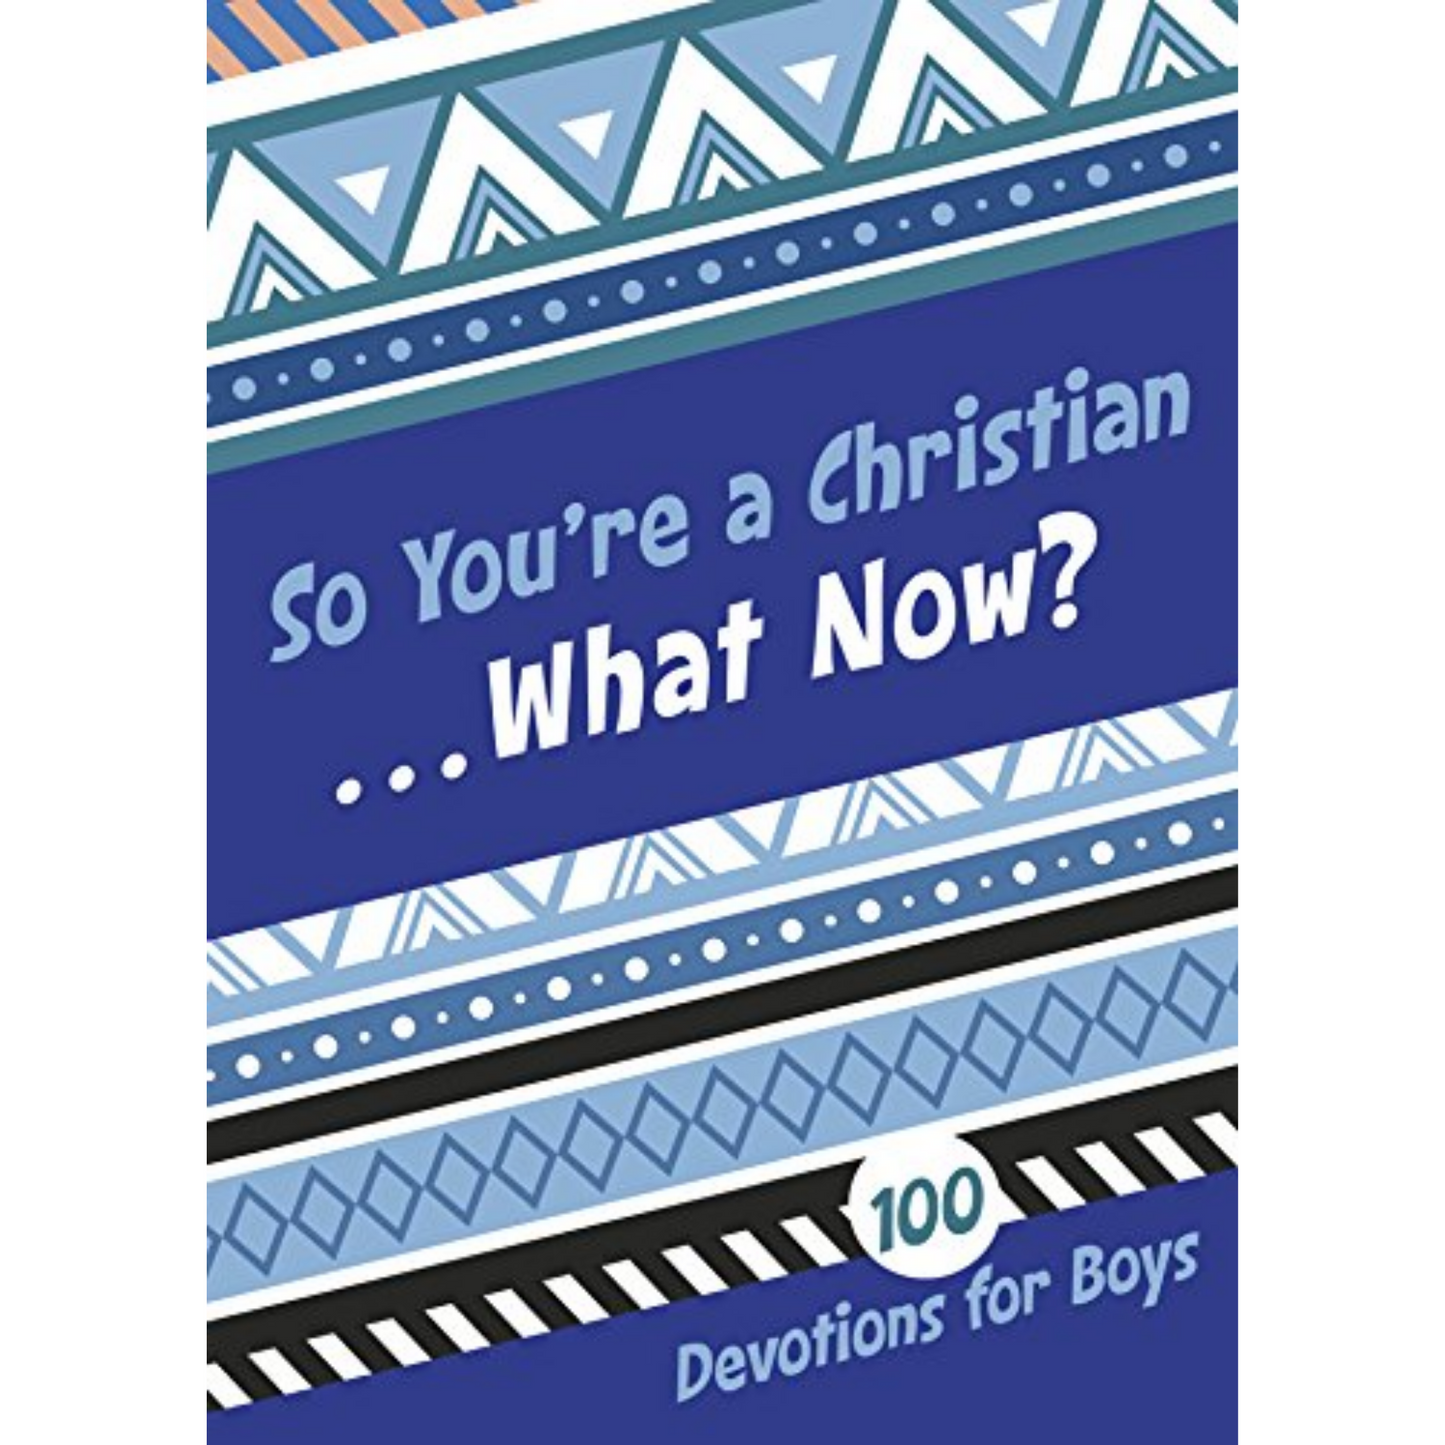 So You're A Christian What Now? 100 Devo For Boys